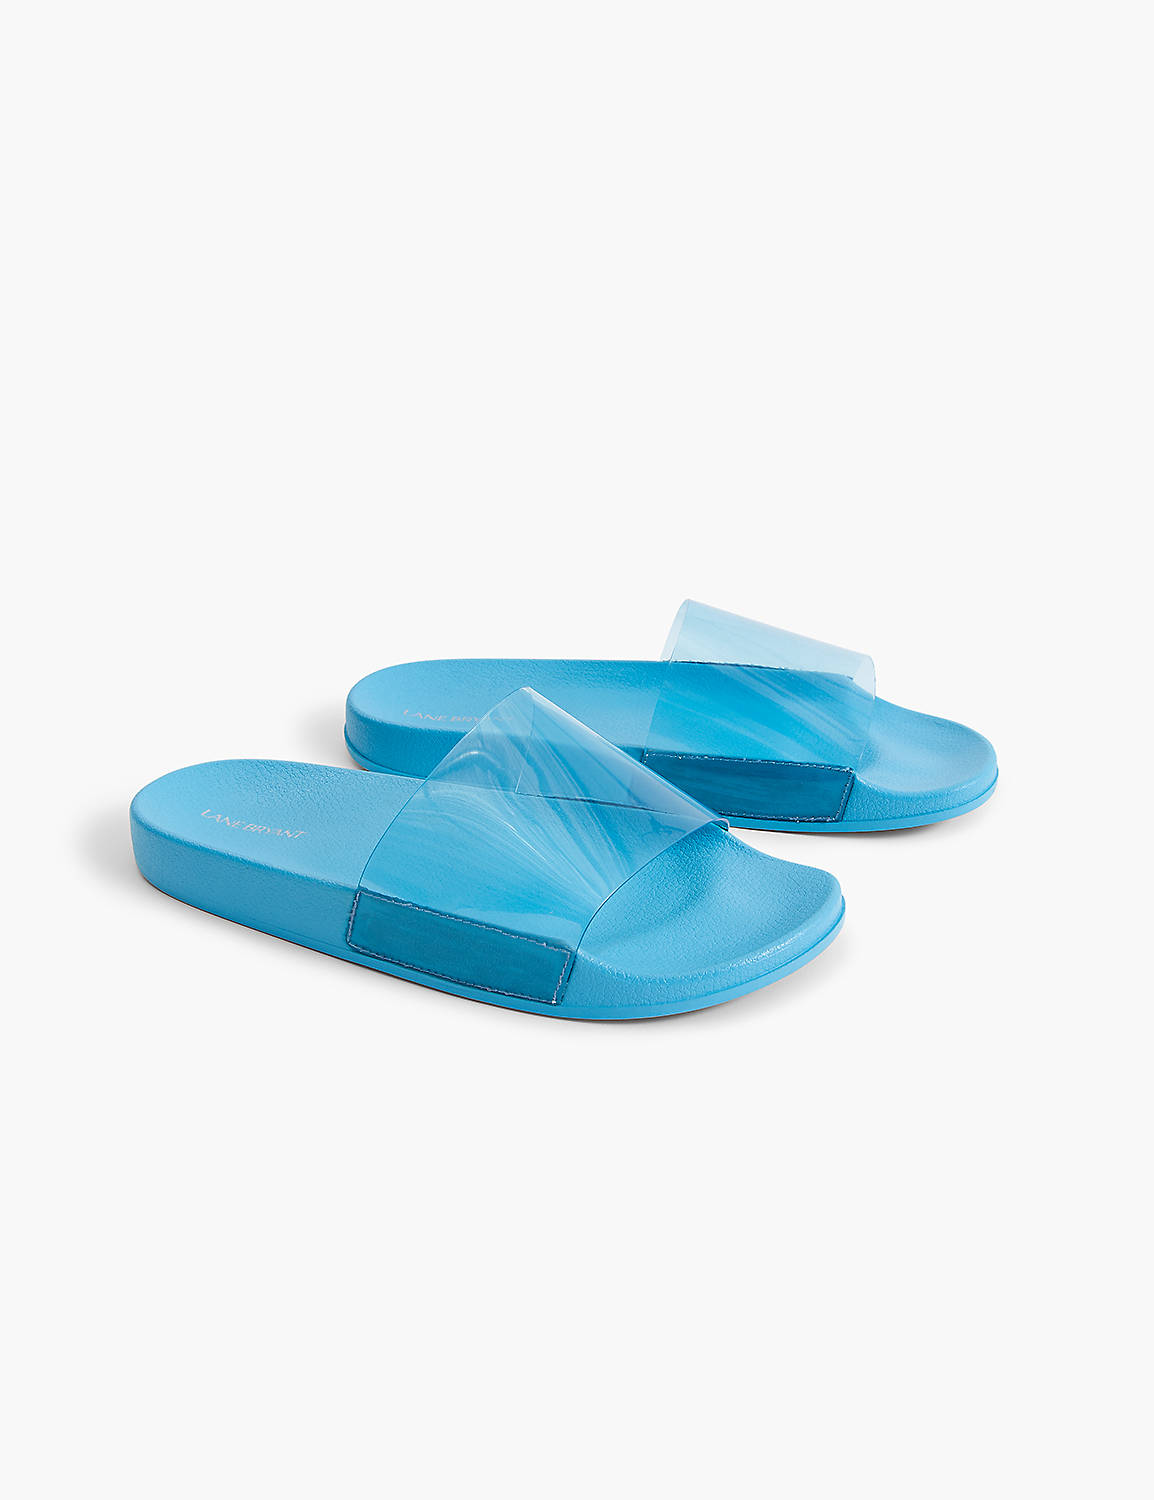 1141596 LUCITE ONE BAND SLIDE Product Image 1